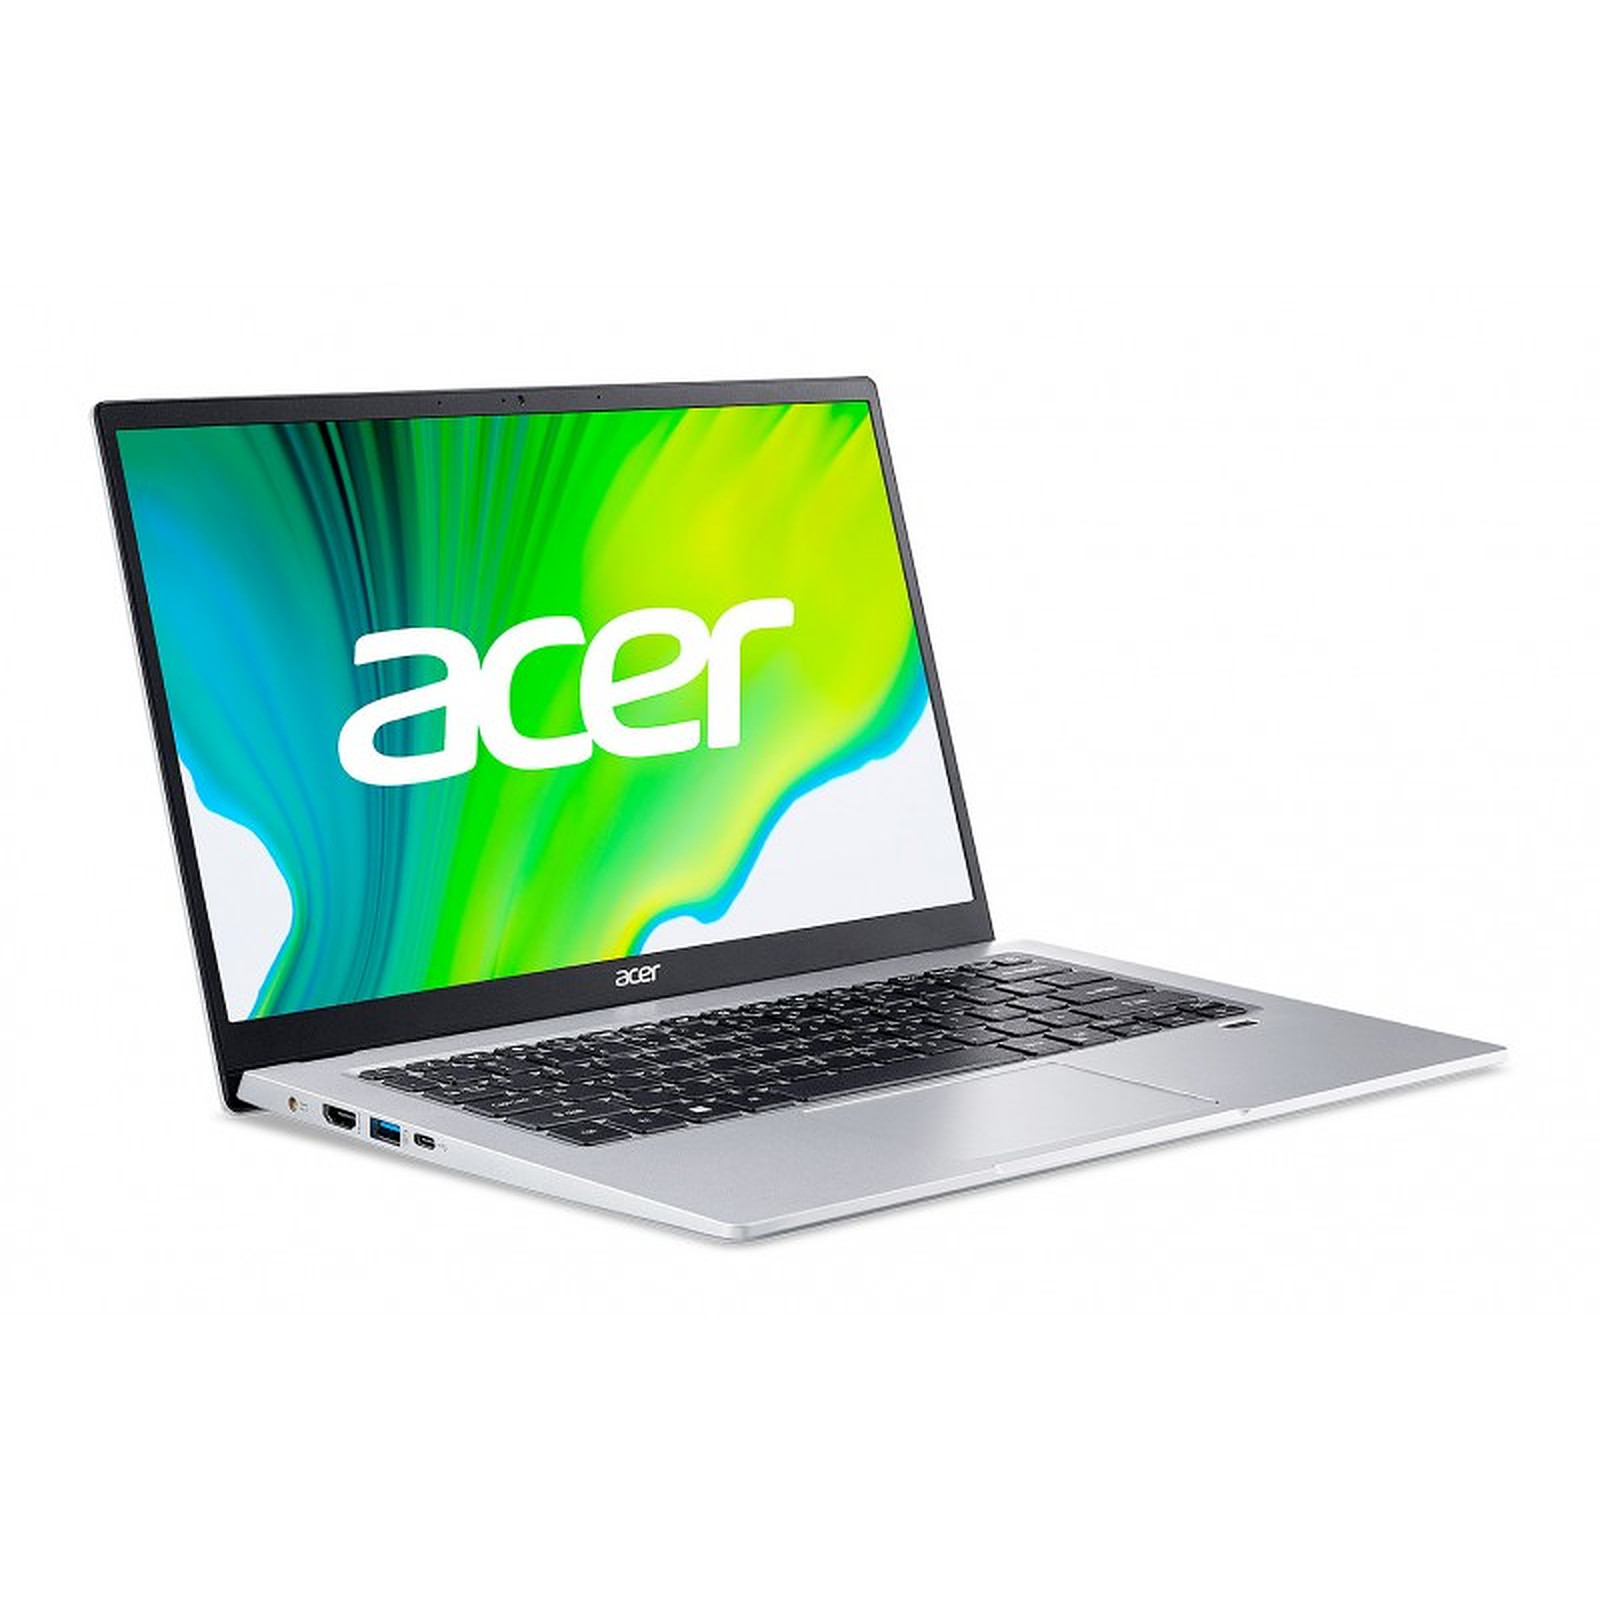 Acer Swift 1 SF114-33-P6A4 (NX.HYSEF.00D) · Reconditionne - PC portable reconditionne Acer